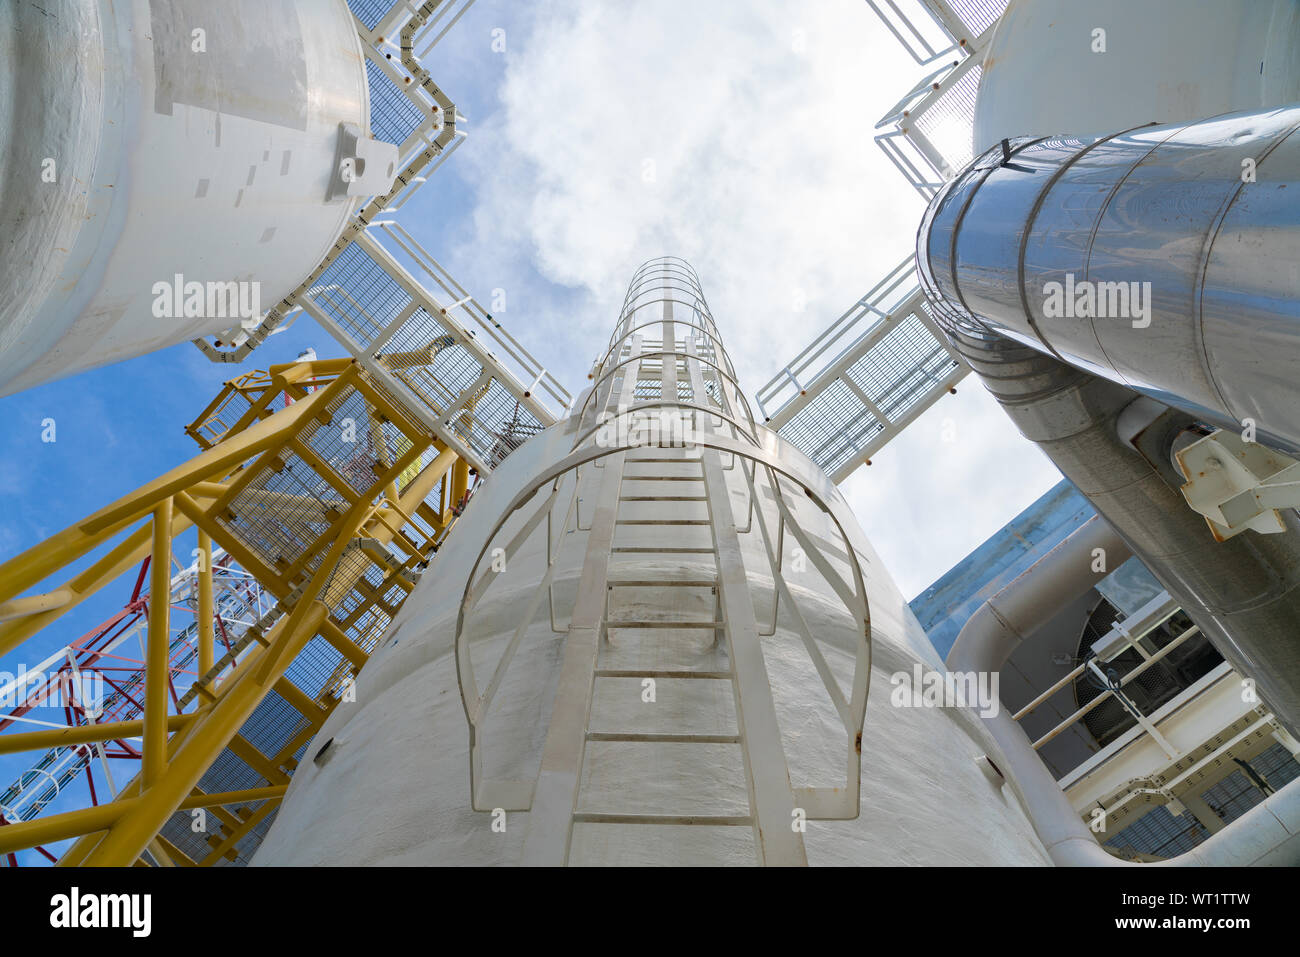 Gas dehydration process to remove moisture from gas before enter to carbon dioxide unit, pressurize vessel and piping of petrochemical industry. Stock Photo